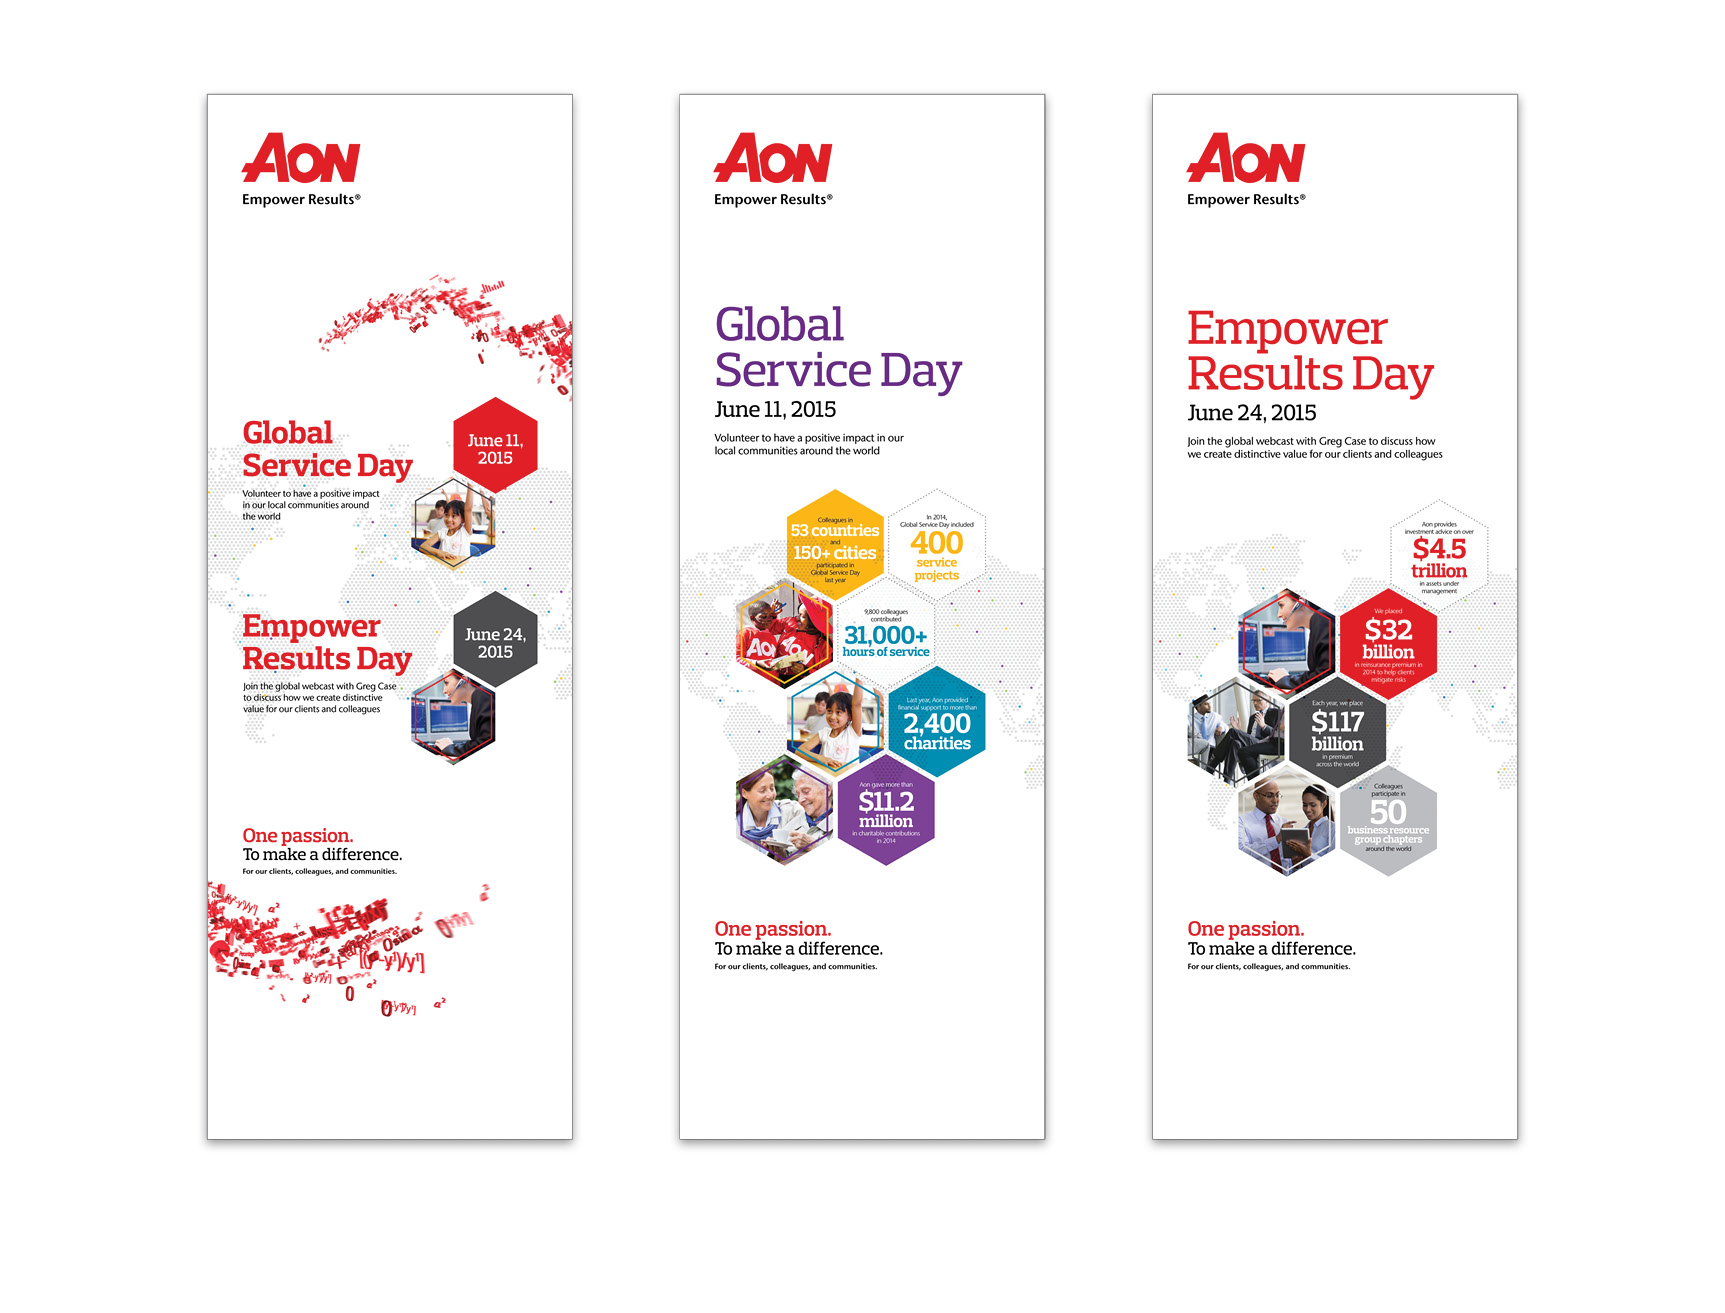  Pull up banners for Global Service Day and Empower Results Day. Both are&nbsp;Aon events promoting public service&nbsp;within local communities around the world. 